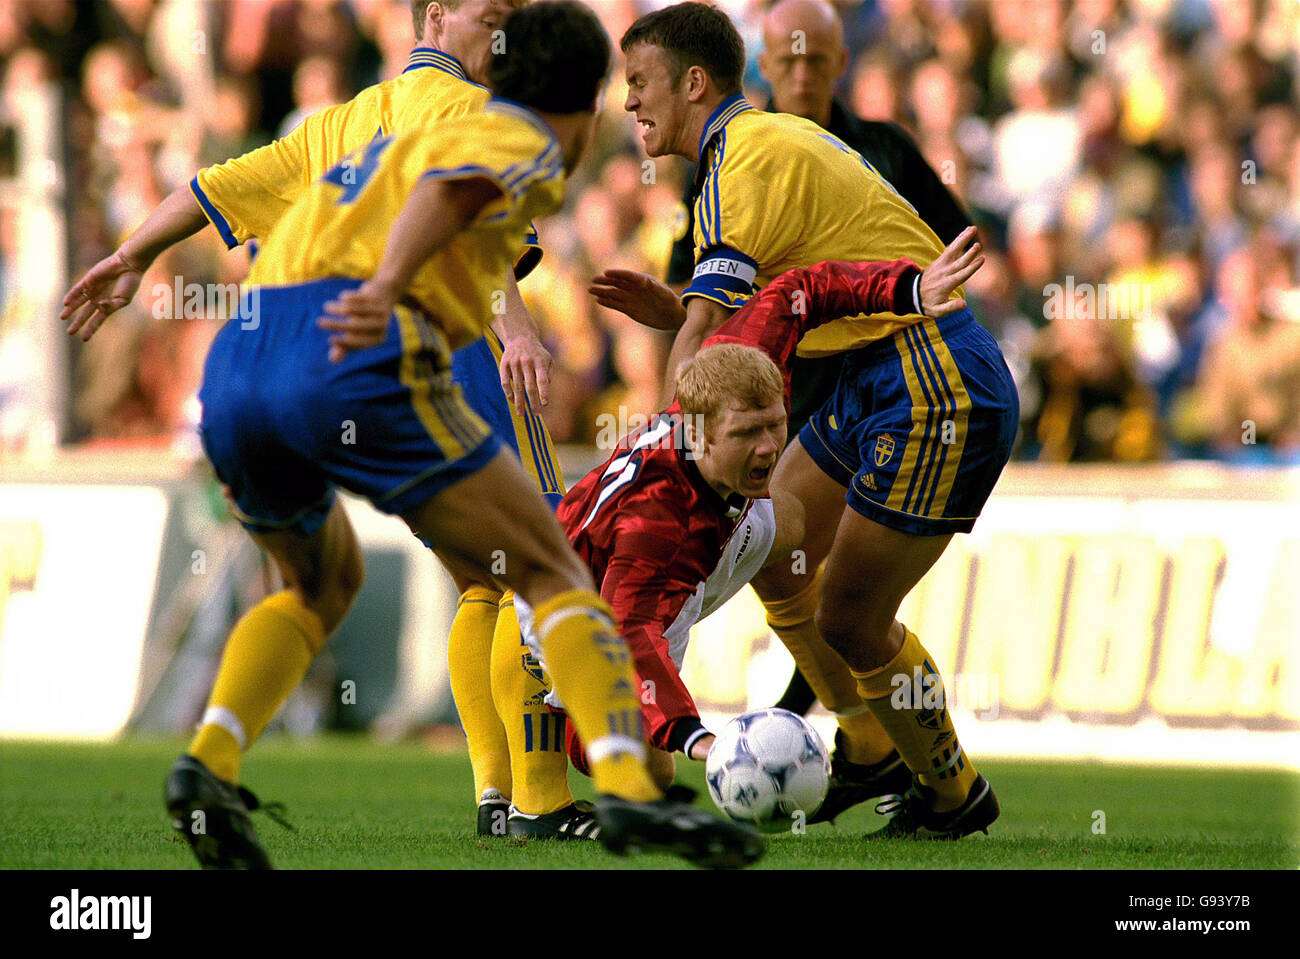 England's Paul Scholes (centre) is brought down by Sweden's Joachim Bjorklund (left) and Patrik Andersson (right) Stock Photo